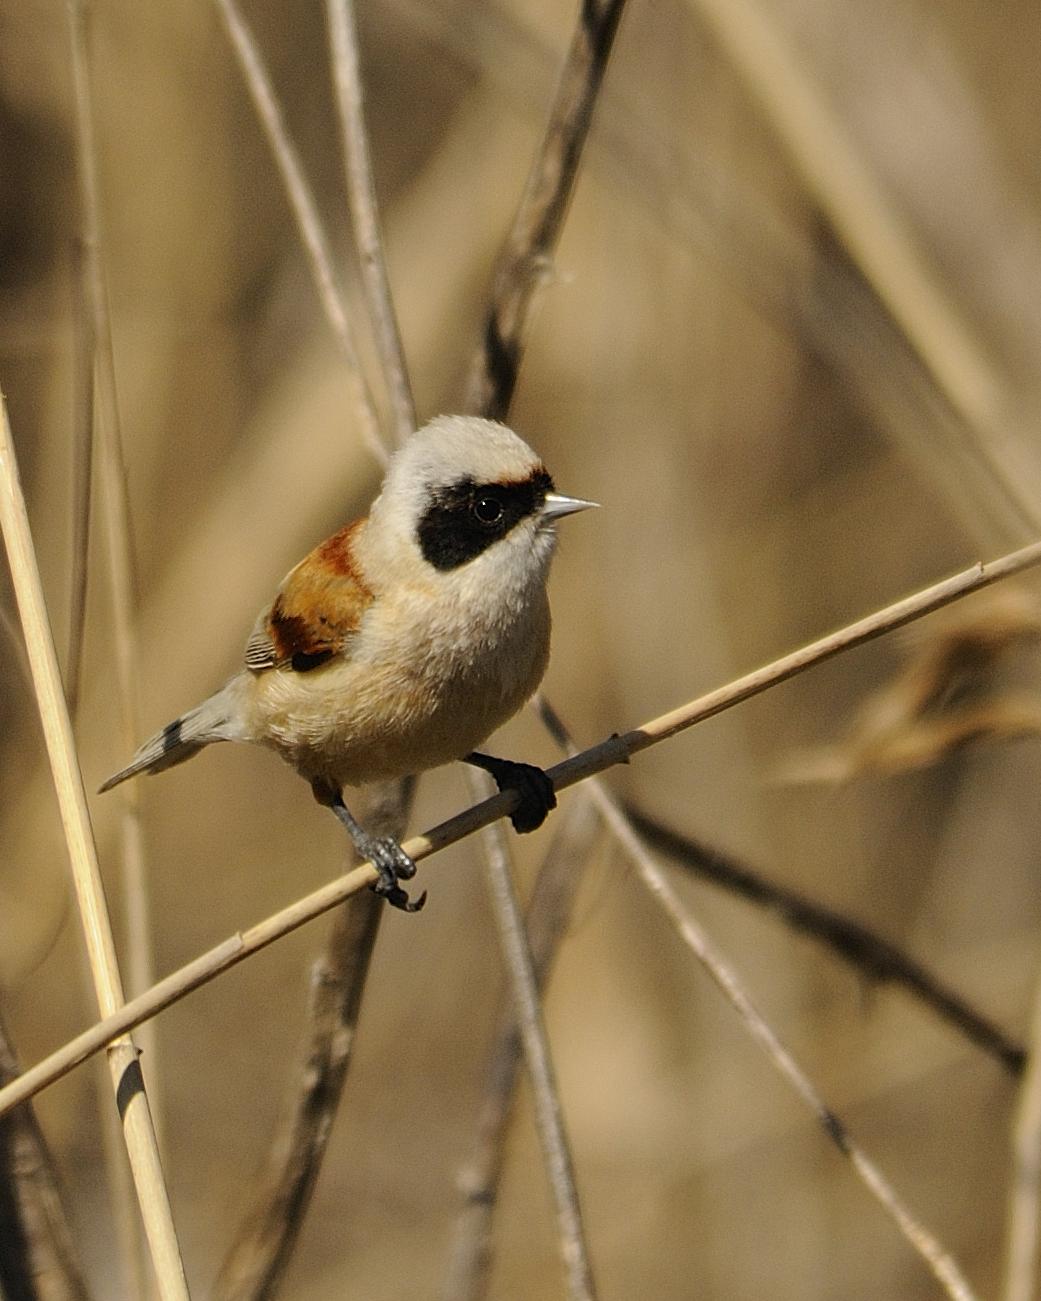 Eurasian Penduline-Tit Photo by Andres Rios